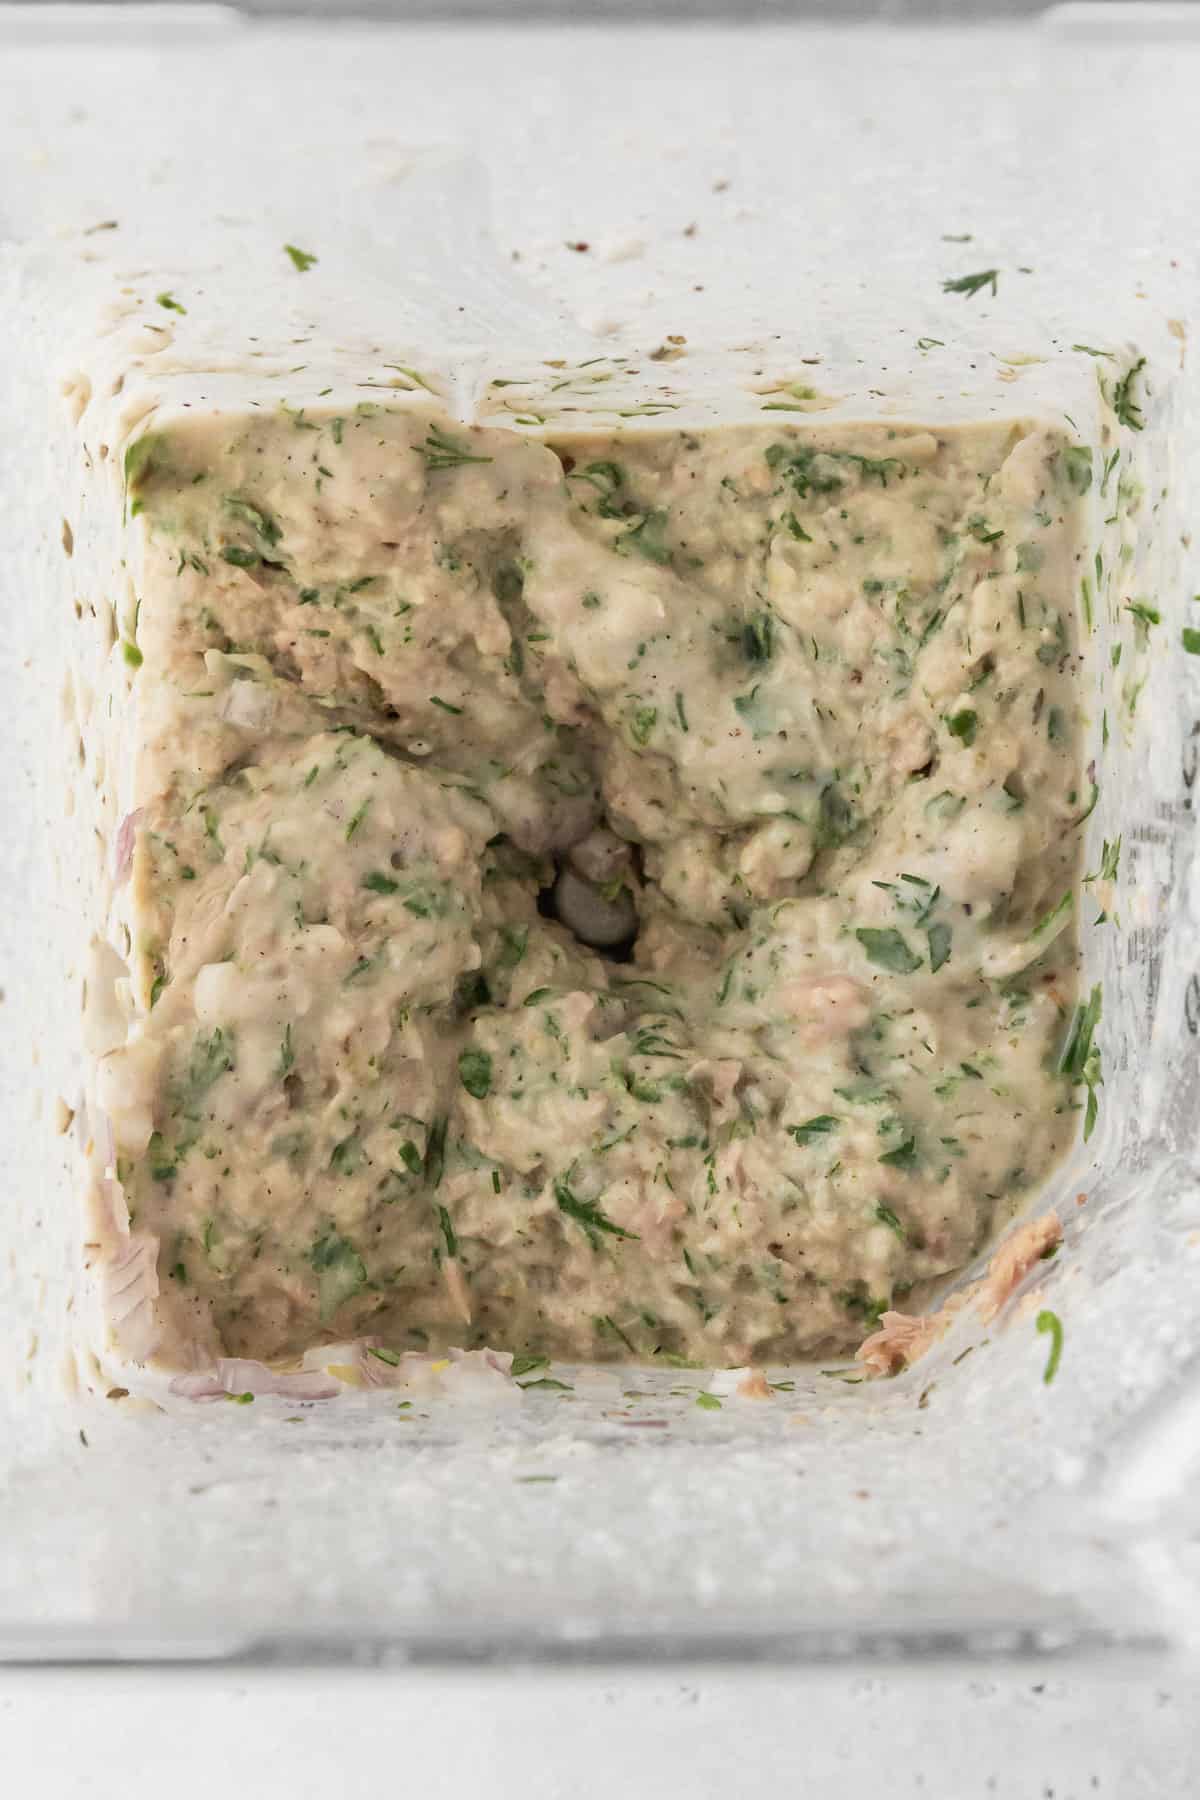 completed white bean tuna dip in blender after adding remaining ingredients.